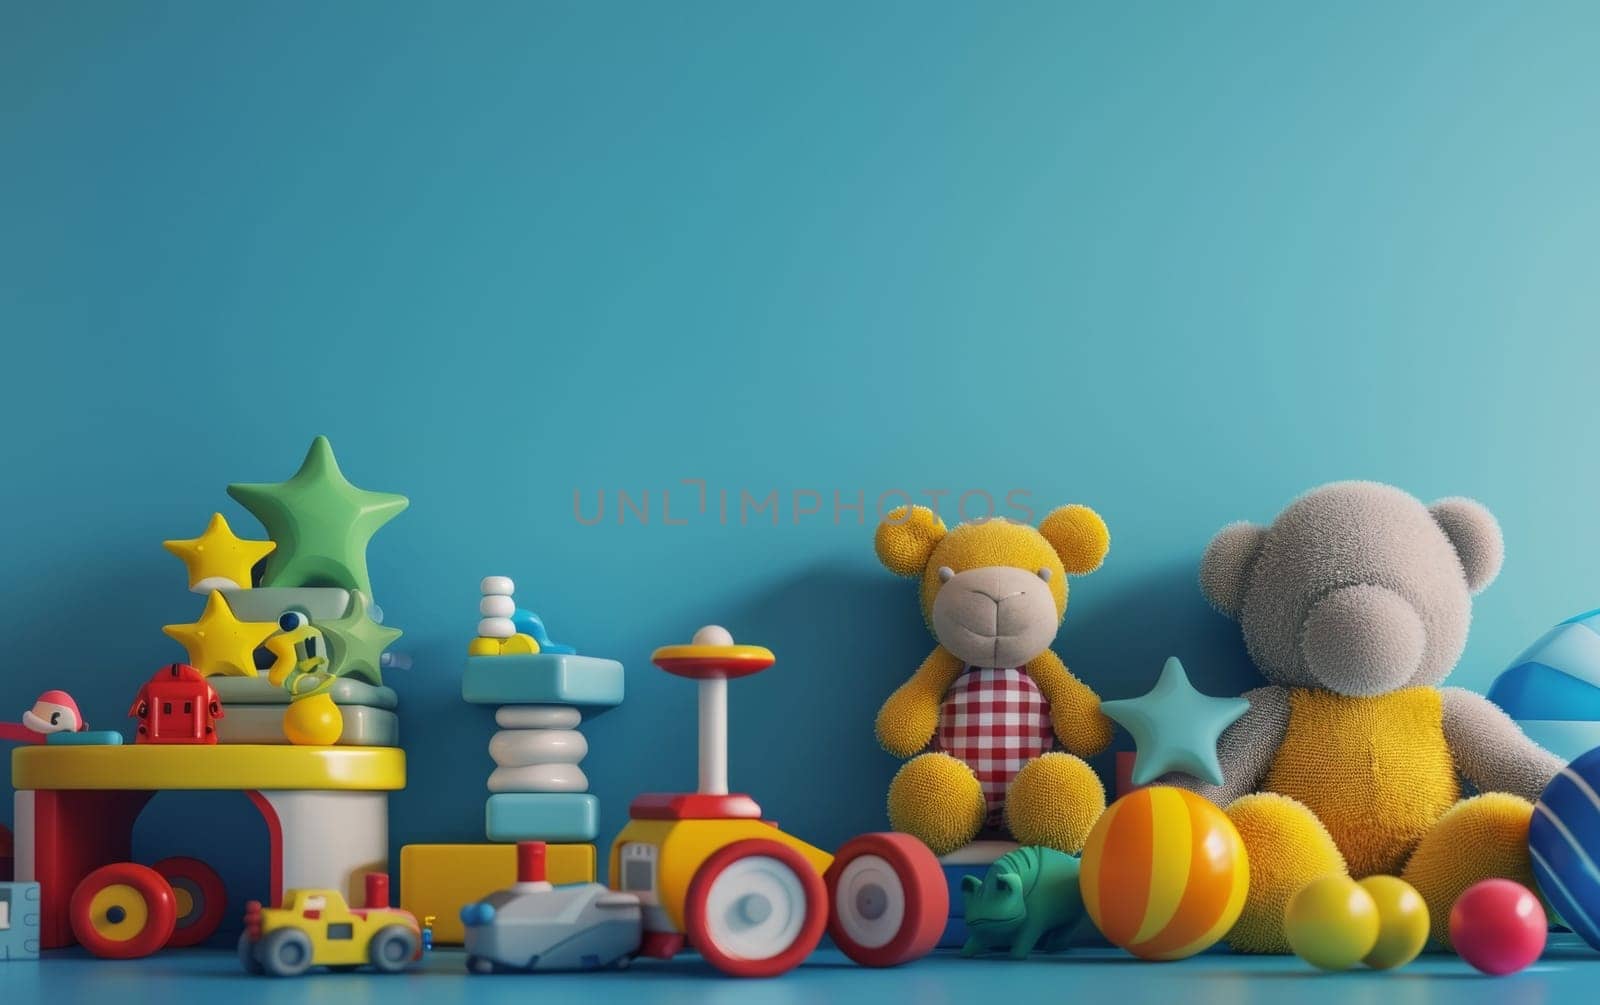 A gentle scene with soft toys, including teddy bears and plush balls, in a calm blue playroom setting, suggesting comfort and play